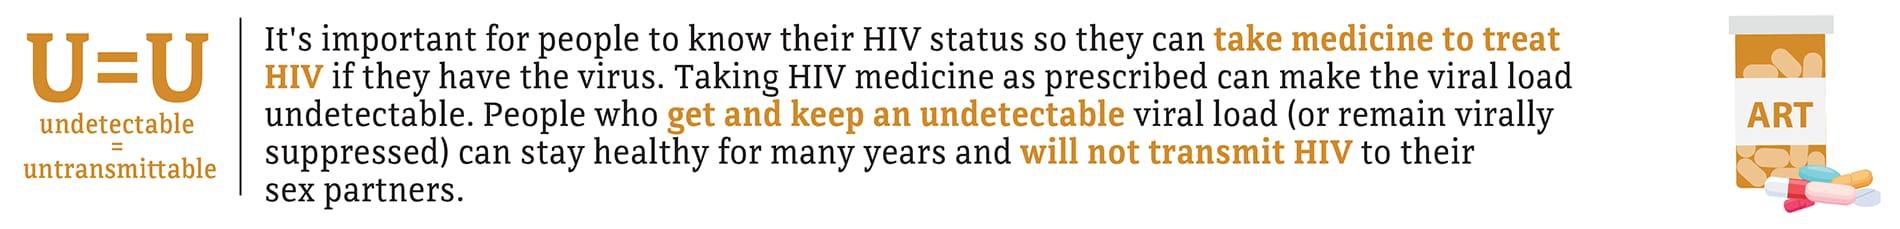 This banner explains that people with HIV who get and keep an undetectable viral load will not transmit HIV to sex partners.